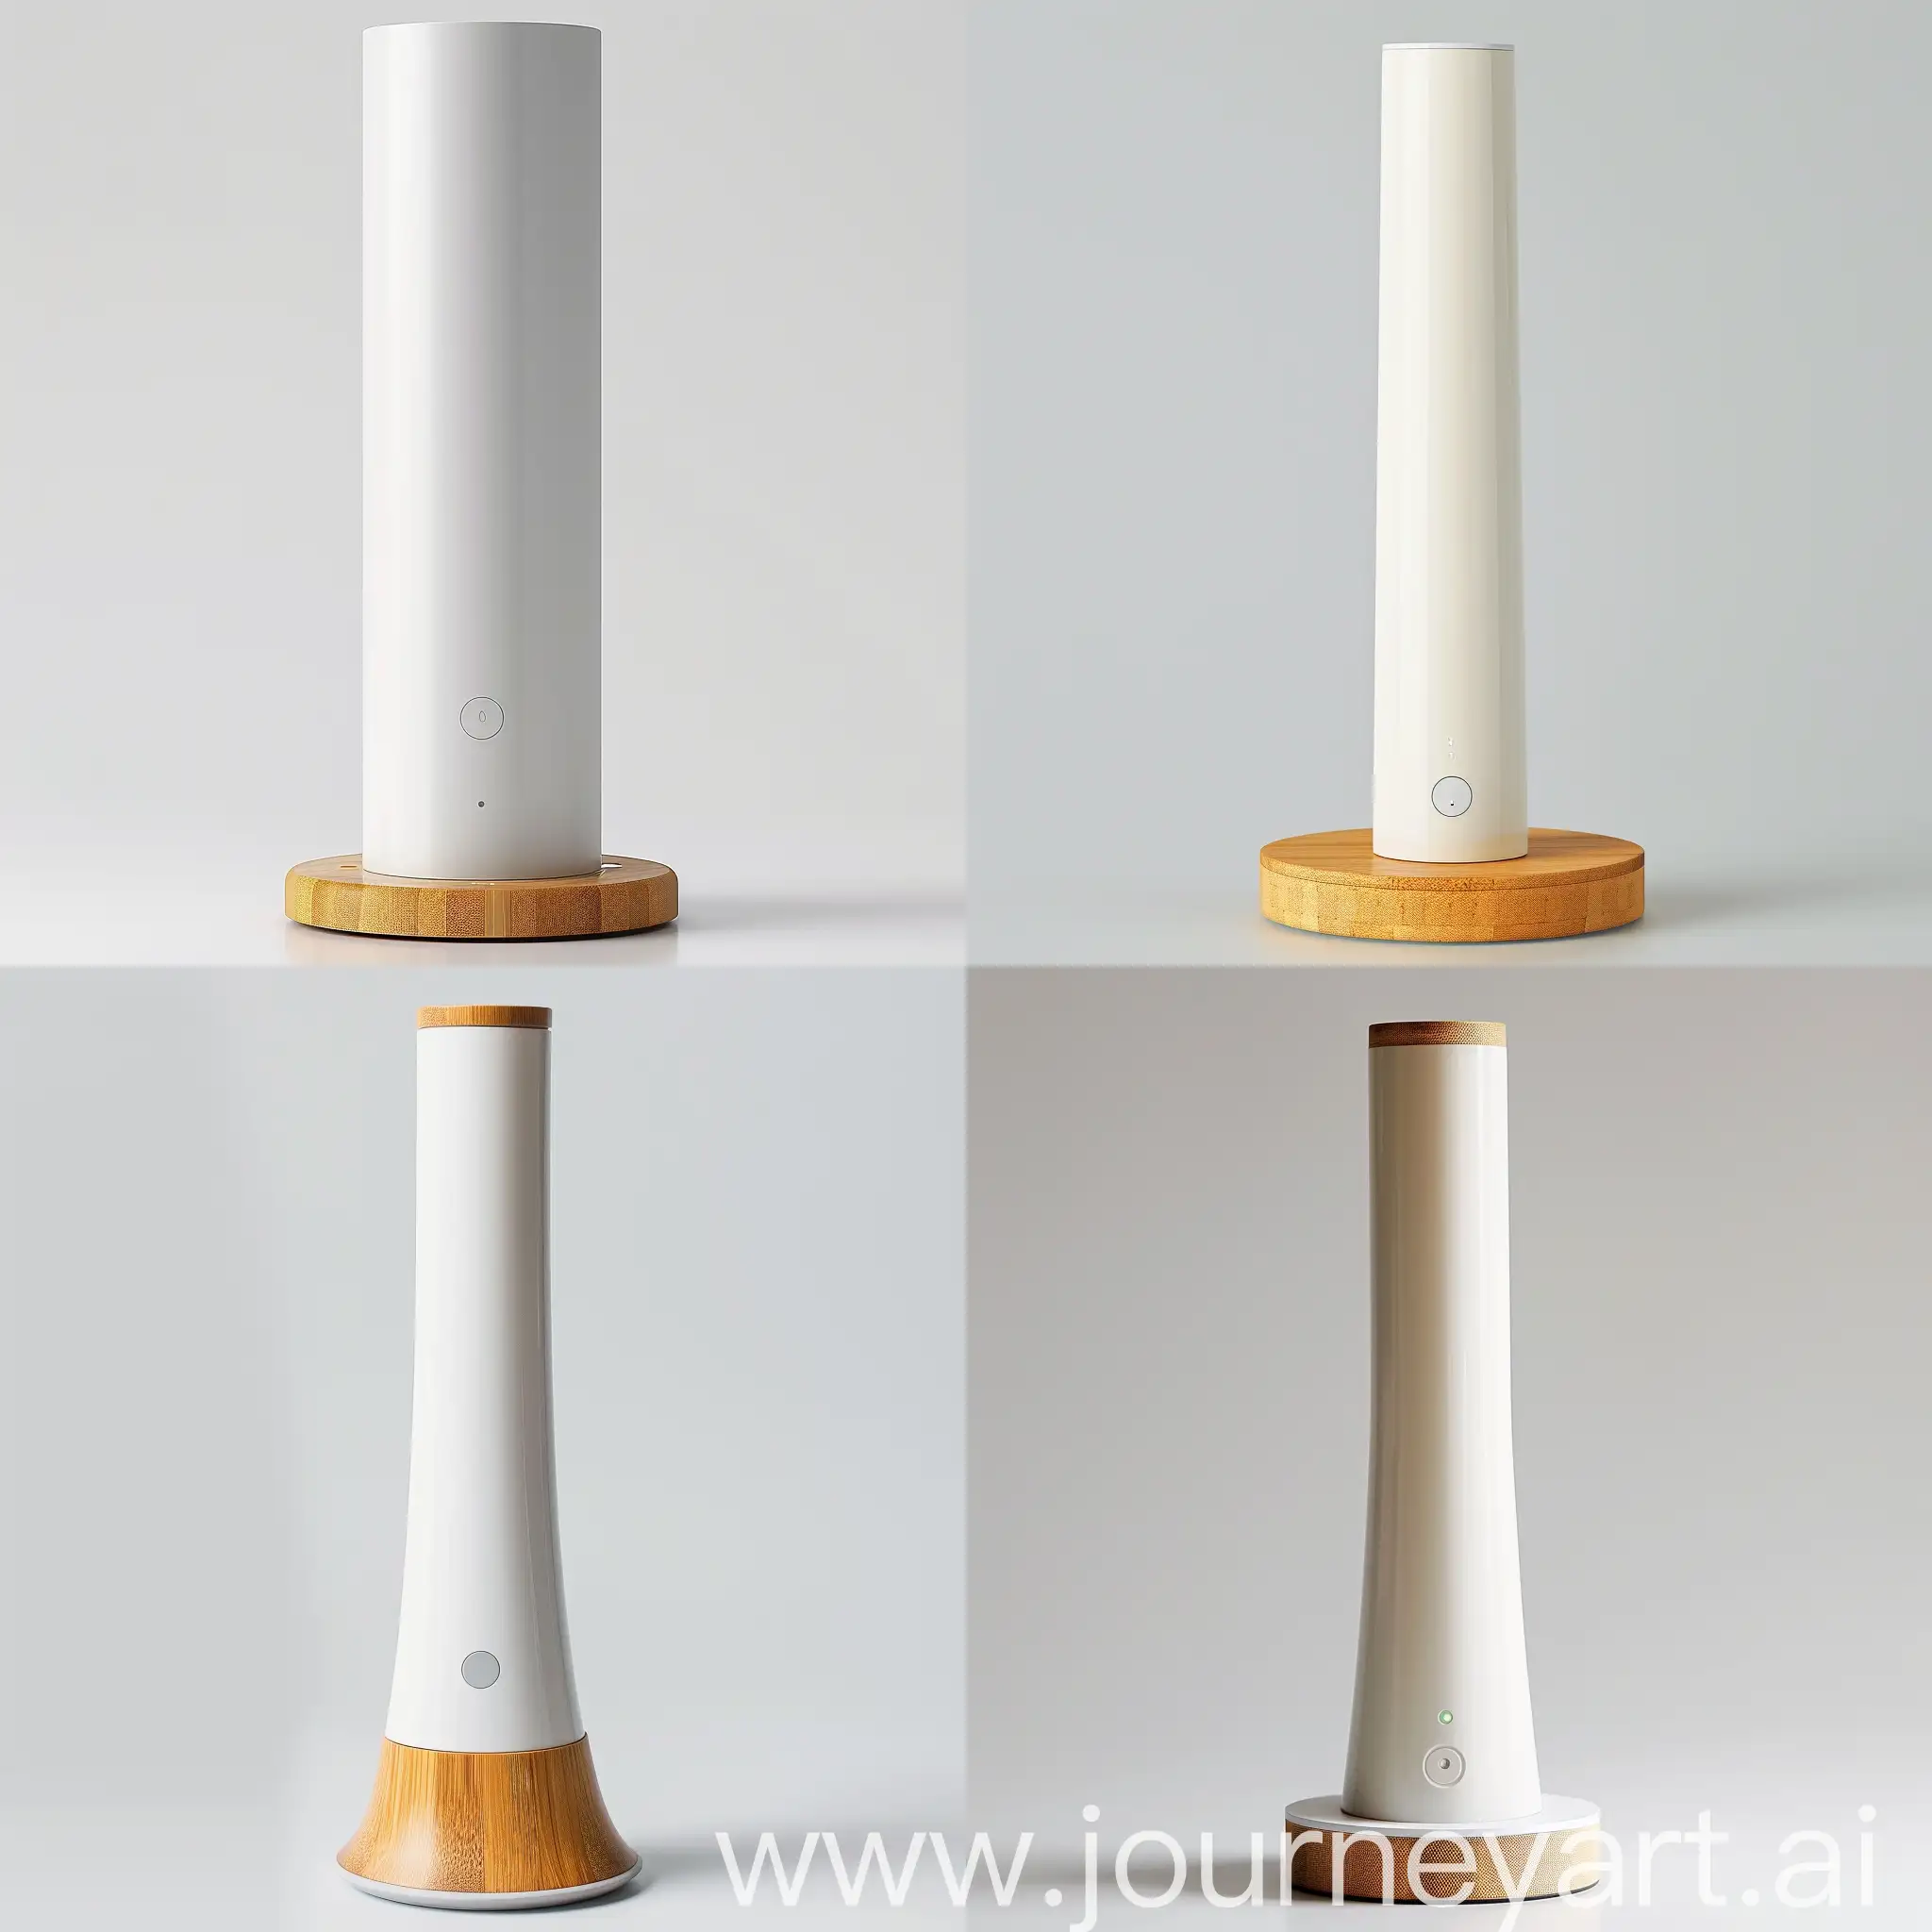 "Imagine a slender, stand-alone energy gateway with a slight taper towards the top, inspired by Japanese minimalism. The base is made of sustainable bamboo, while the body is constructed from recycled plastics, finished in white or light gray. Standing 30 cm tall with a circular base diameter of 8 cm, this device features soft LED lighting for notifications and a laser-engraved logo on the bamboo base. It serves as a central hub for smart home devices, simplifying energy management with a touch of Zen-inspired elegance, blending seamlessly into eco-conscious homes."realistic product style